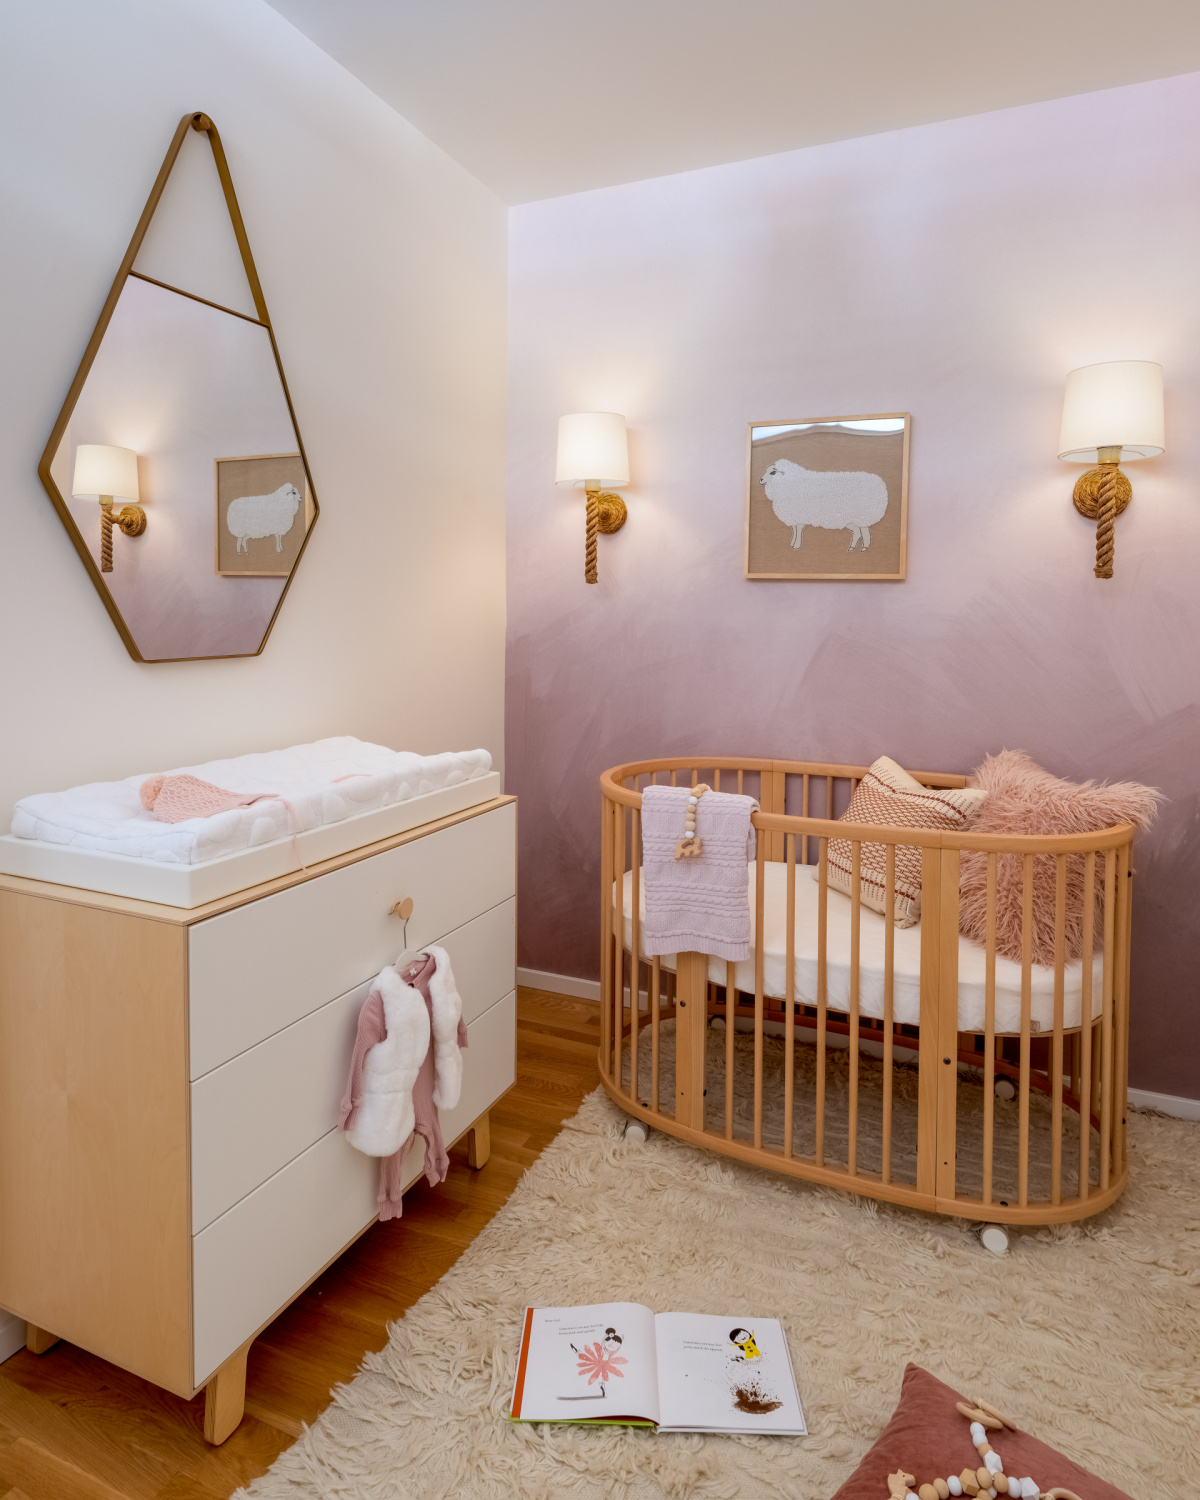 Nursery design by Kathy Kuo Home